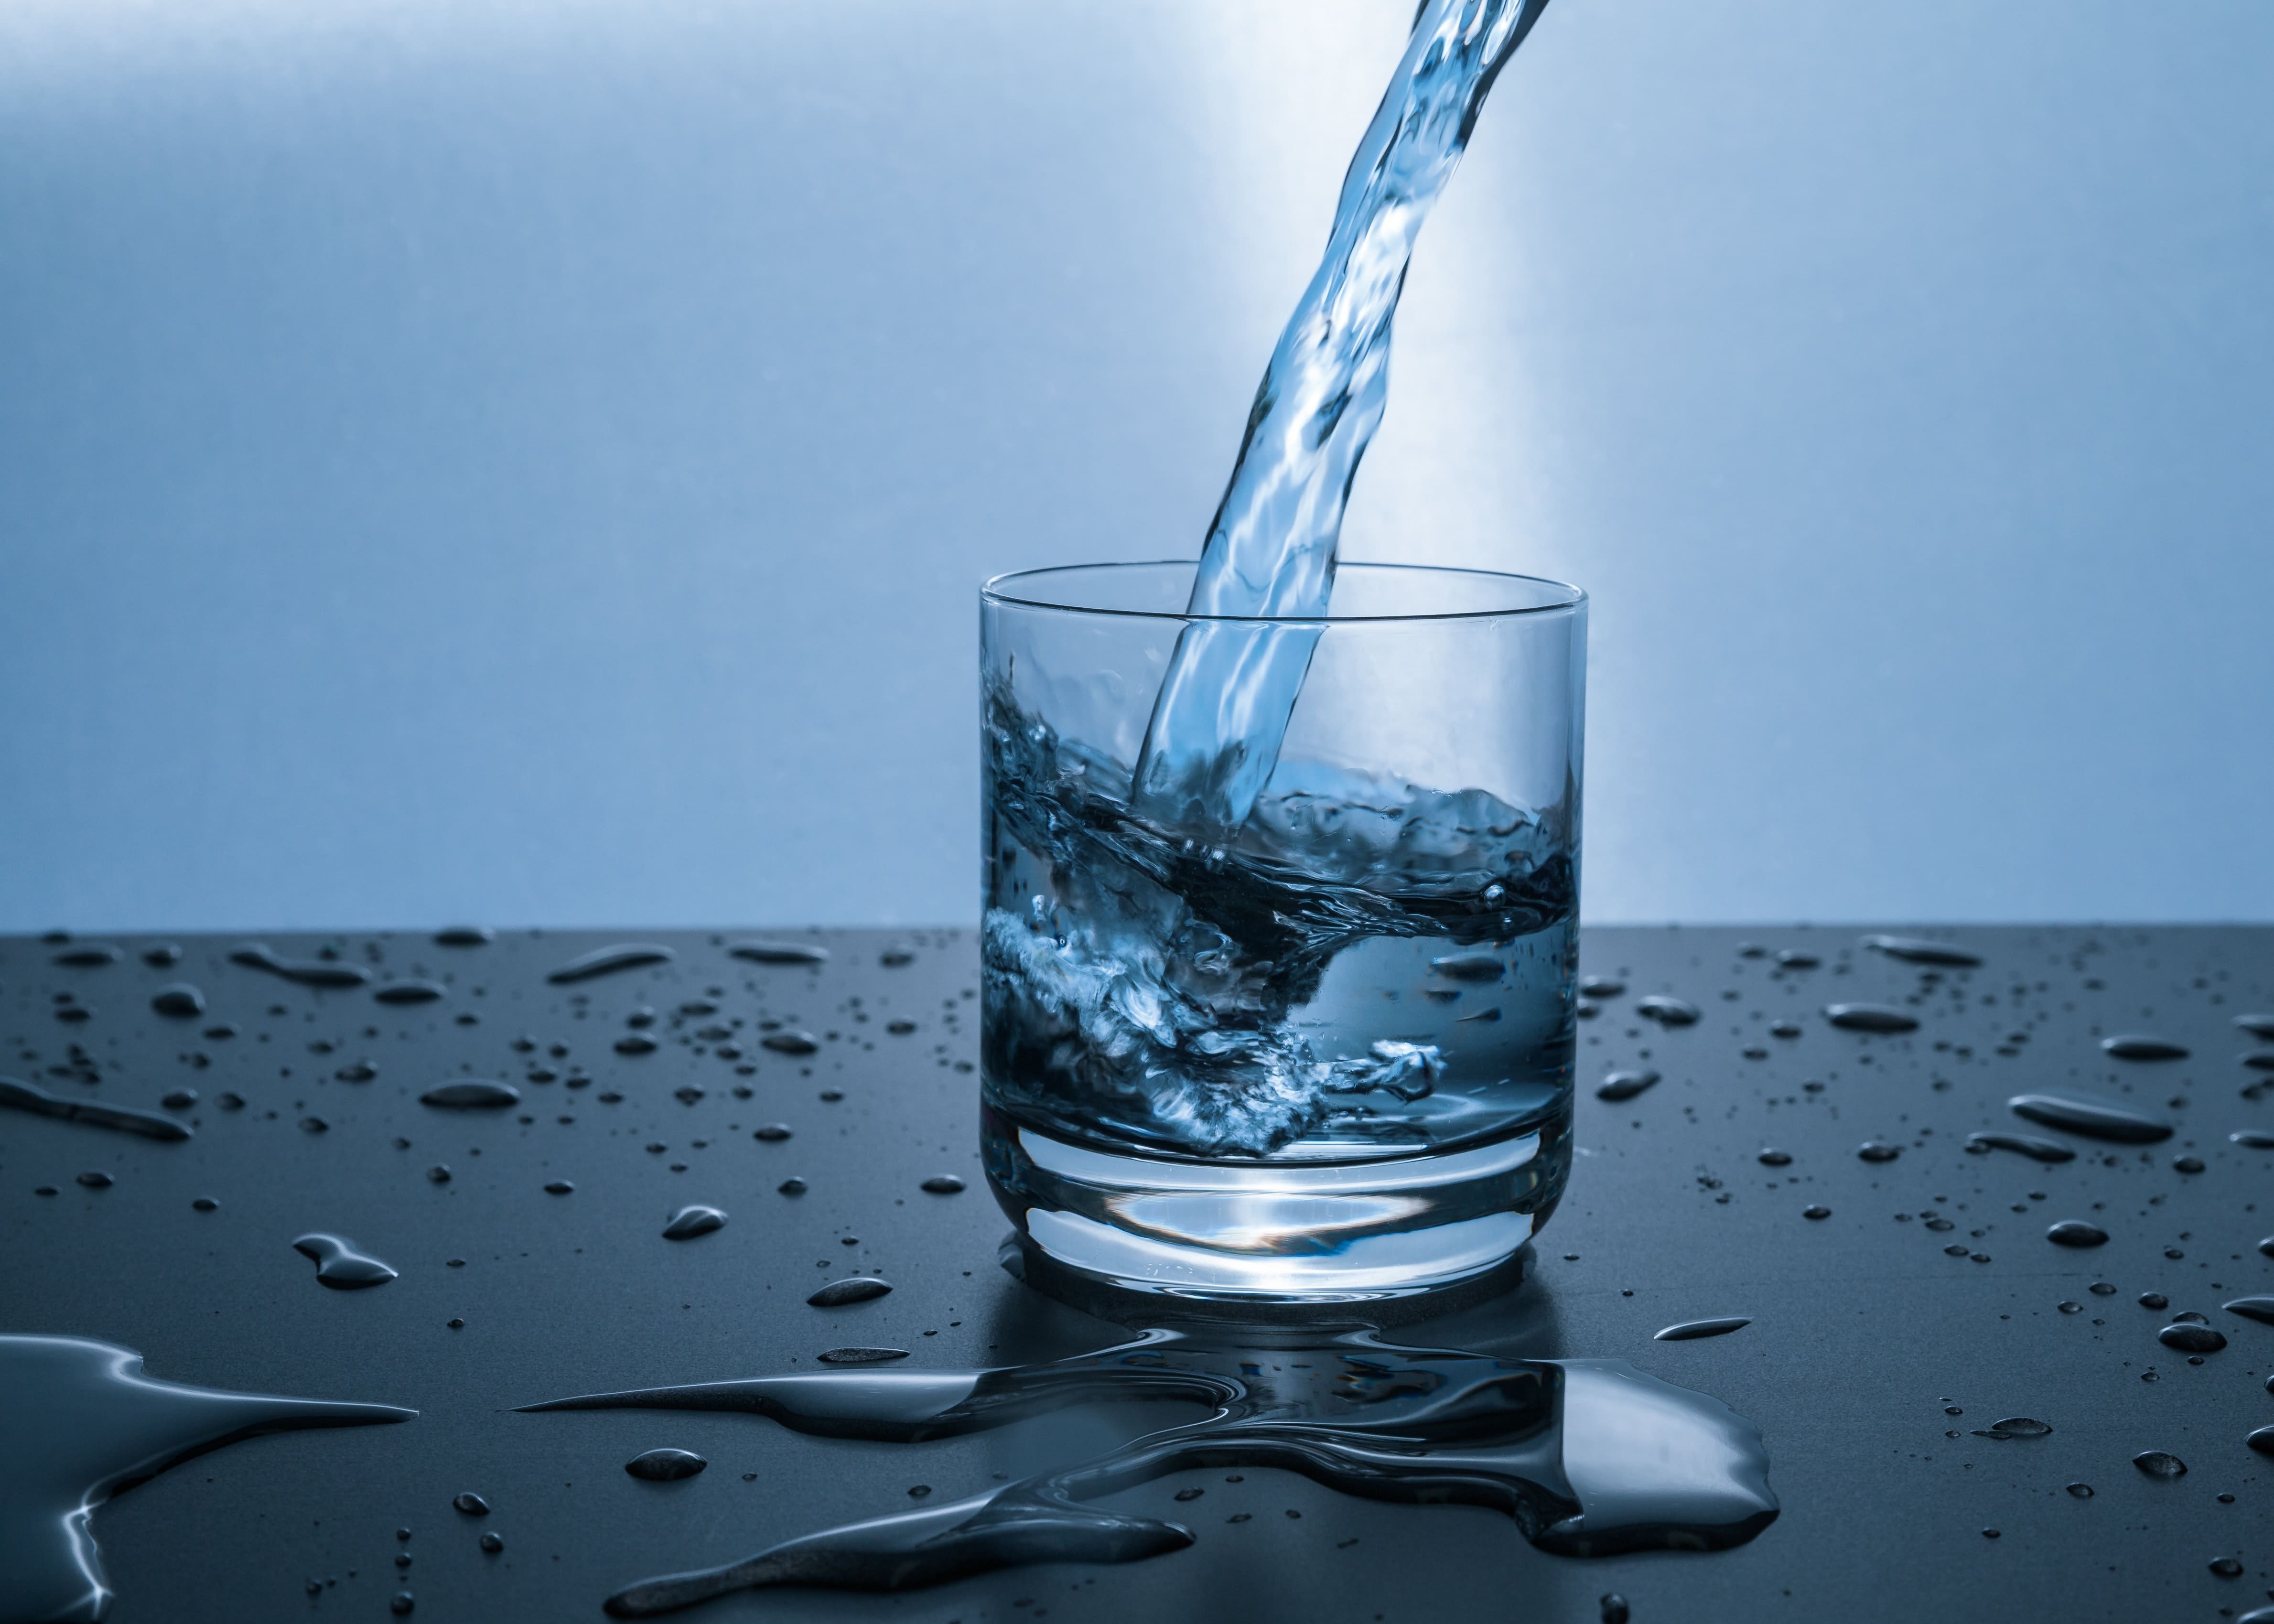 Glass of water being filled from above, with droplets of water surrounding the glass.